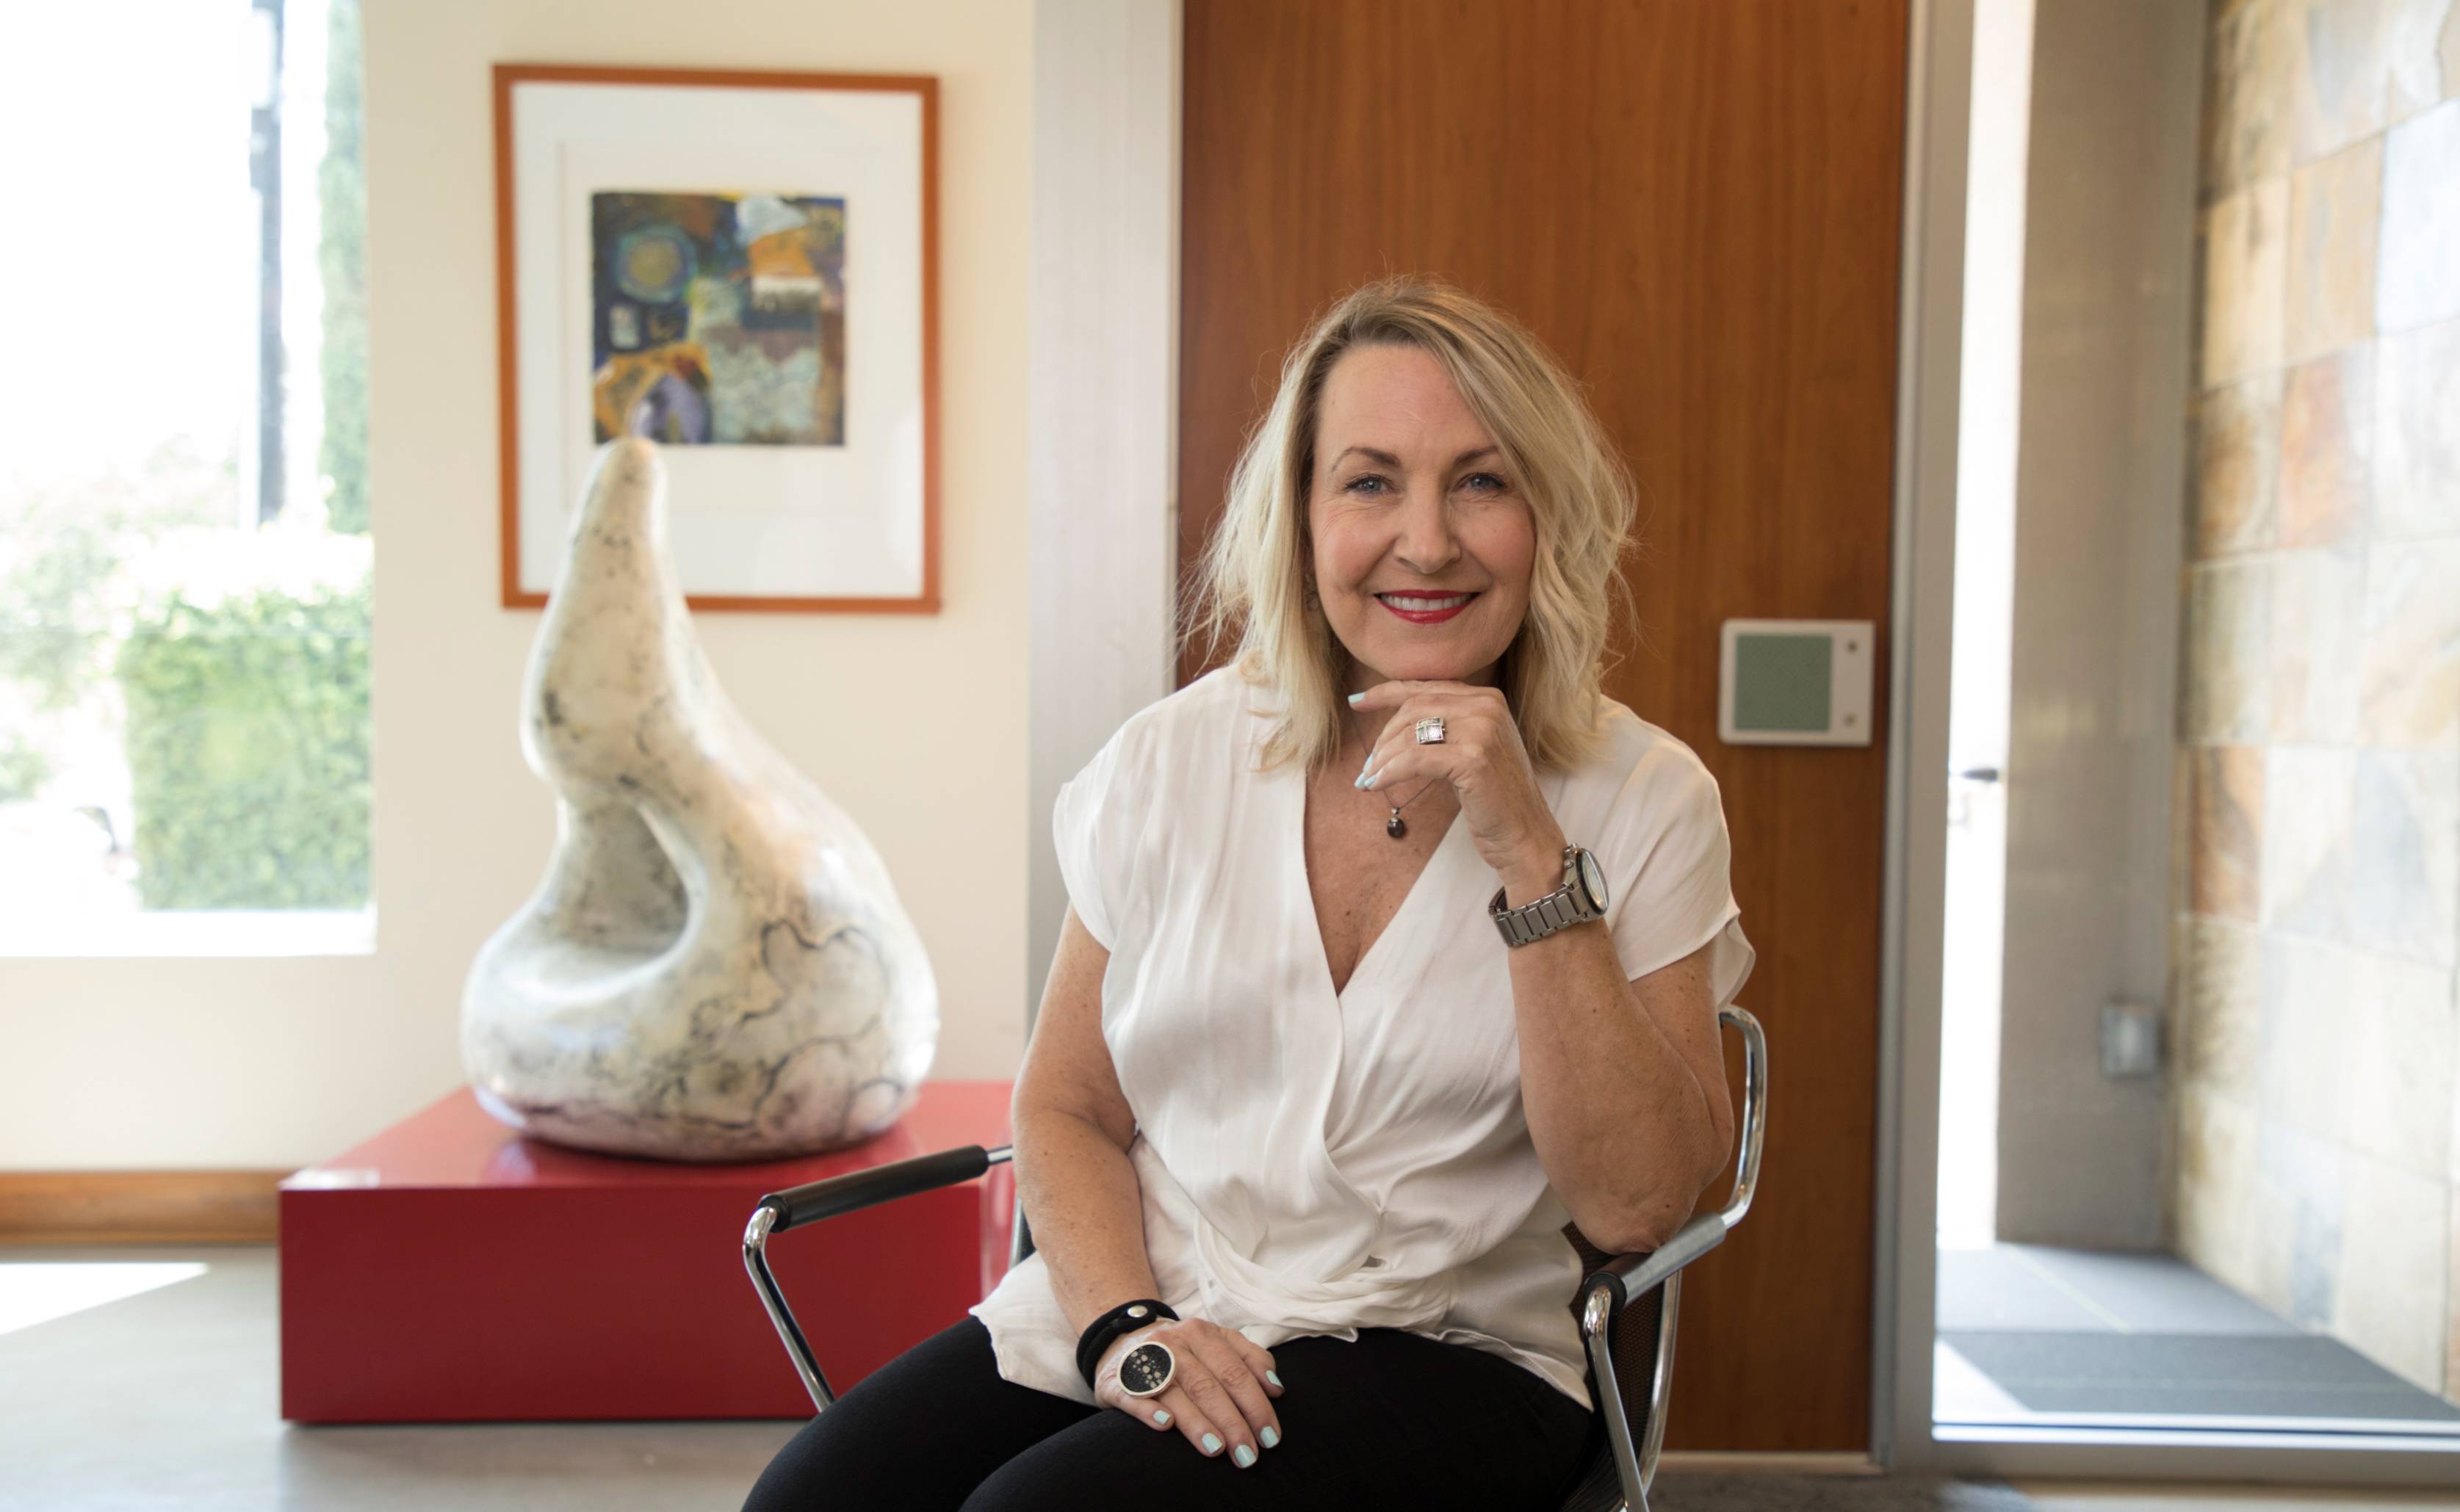 Donor, Leslie Fossler is seated in her office with a sclupture behind her